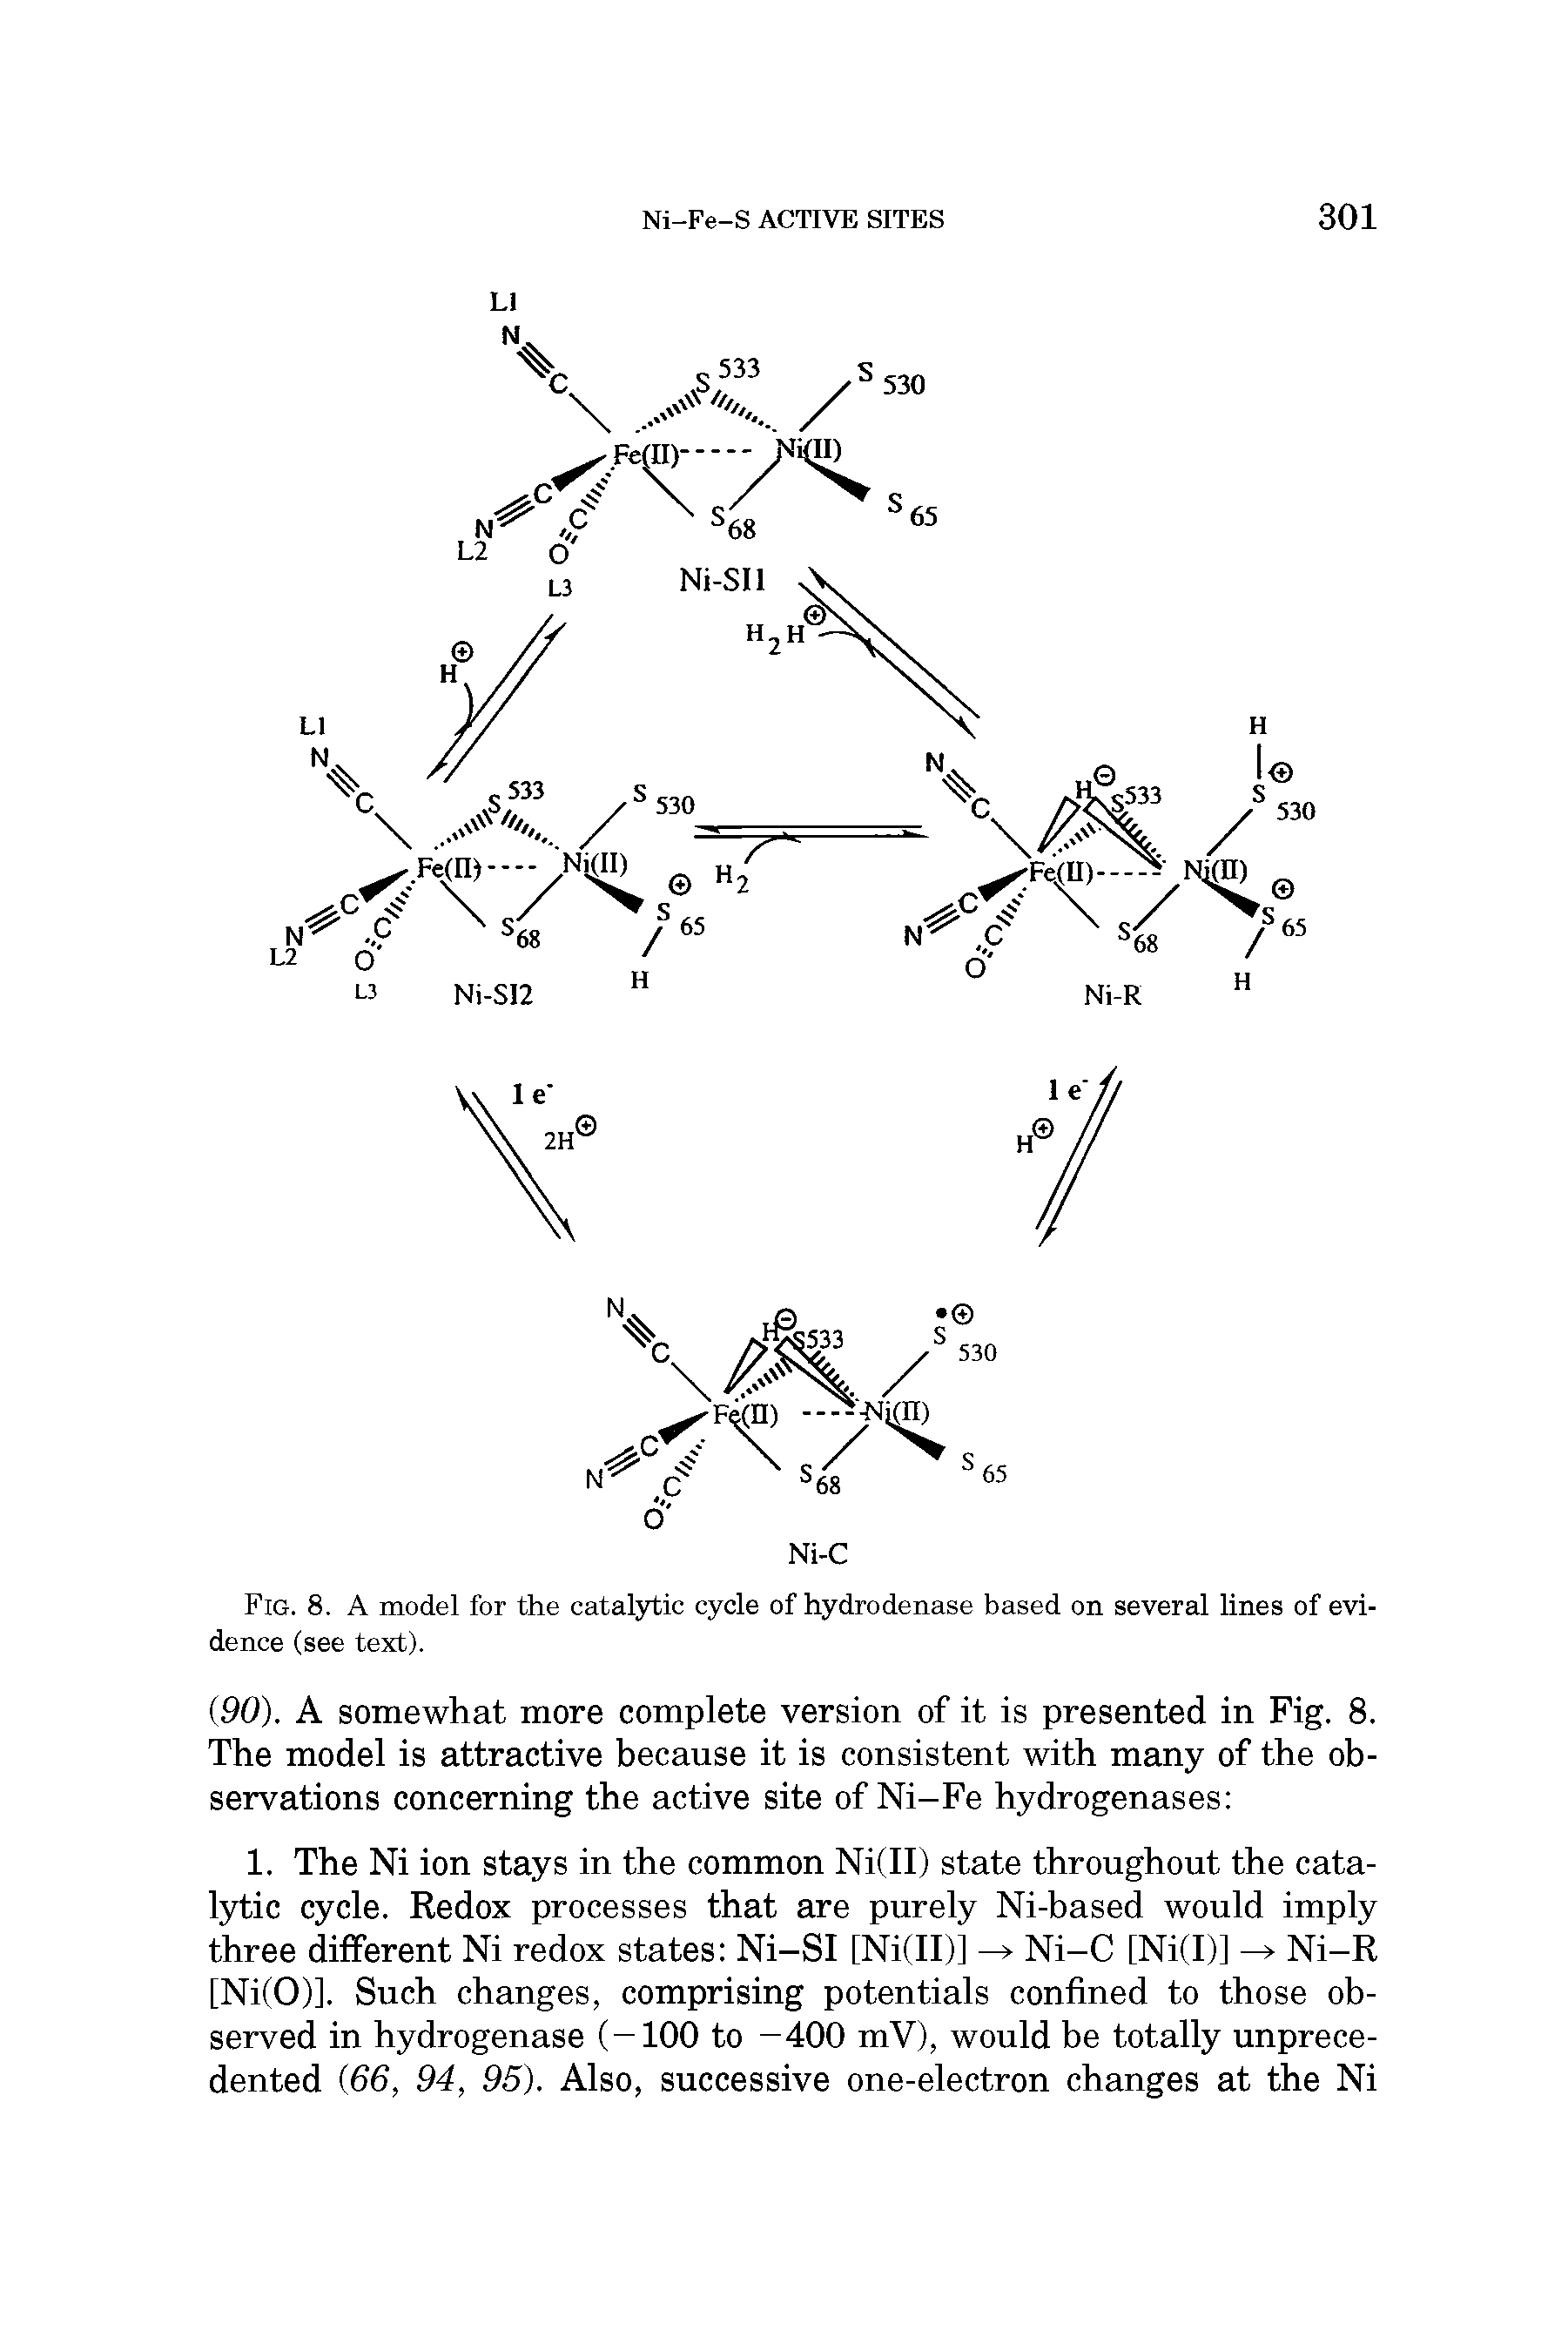 Fig. 8. A model for the catalytic cycle of hydrodenase based on several lines of evidence (see text).